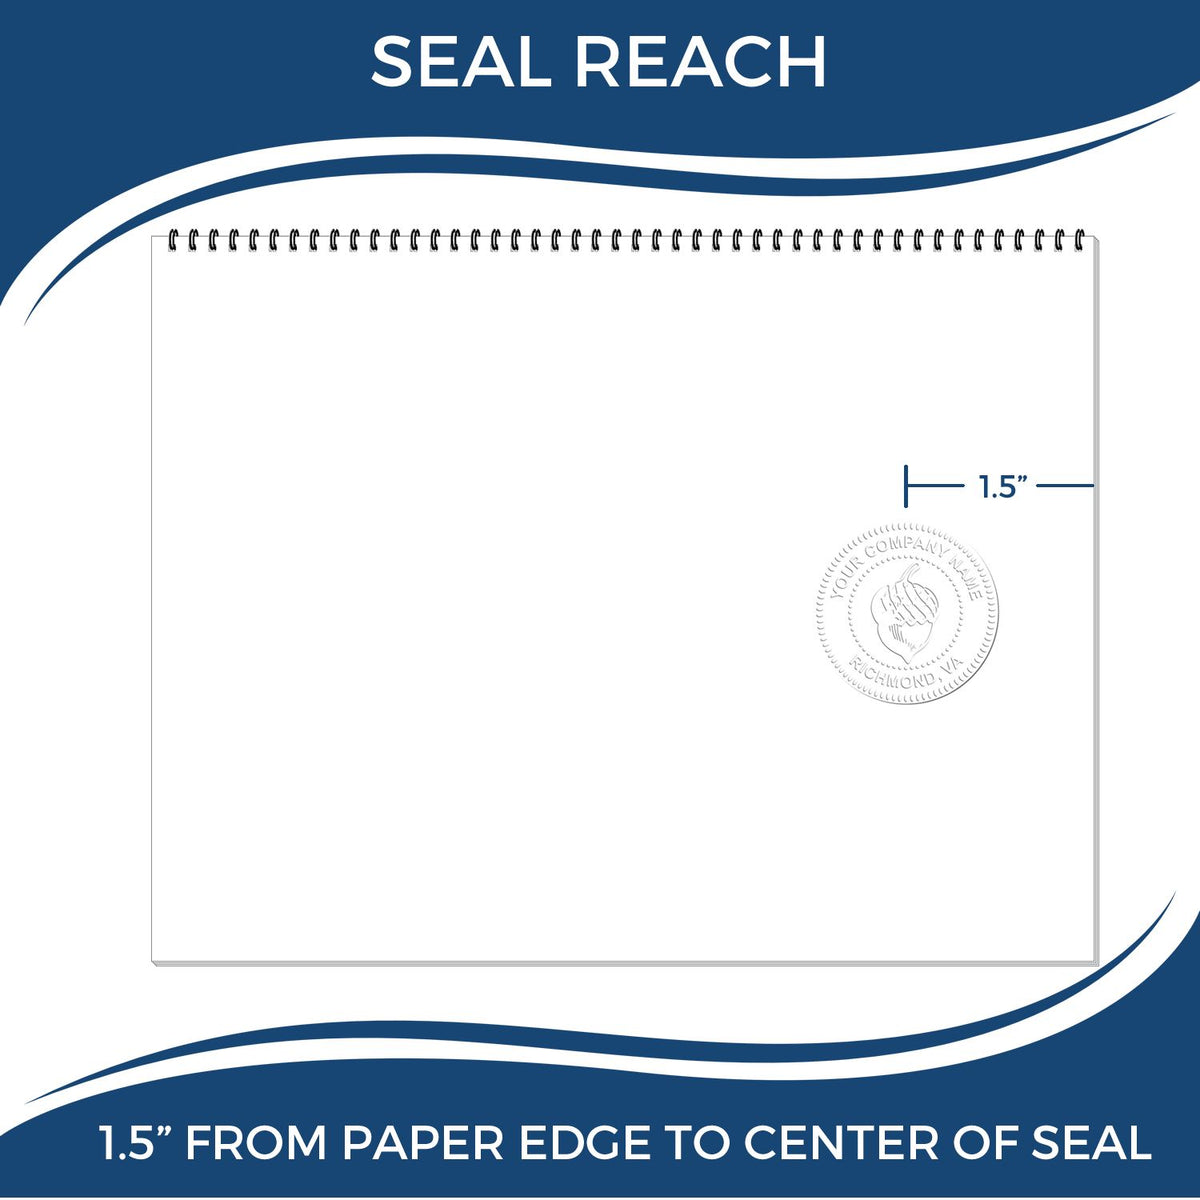 An infographic showing the seal reach which is represented by a ruler and a miniature seal image of the Hybrid Arkansas Landscape Architect Seal